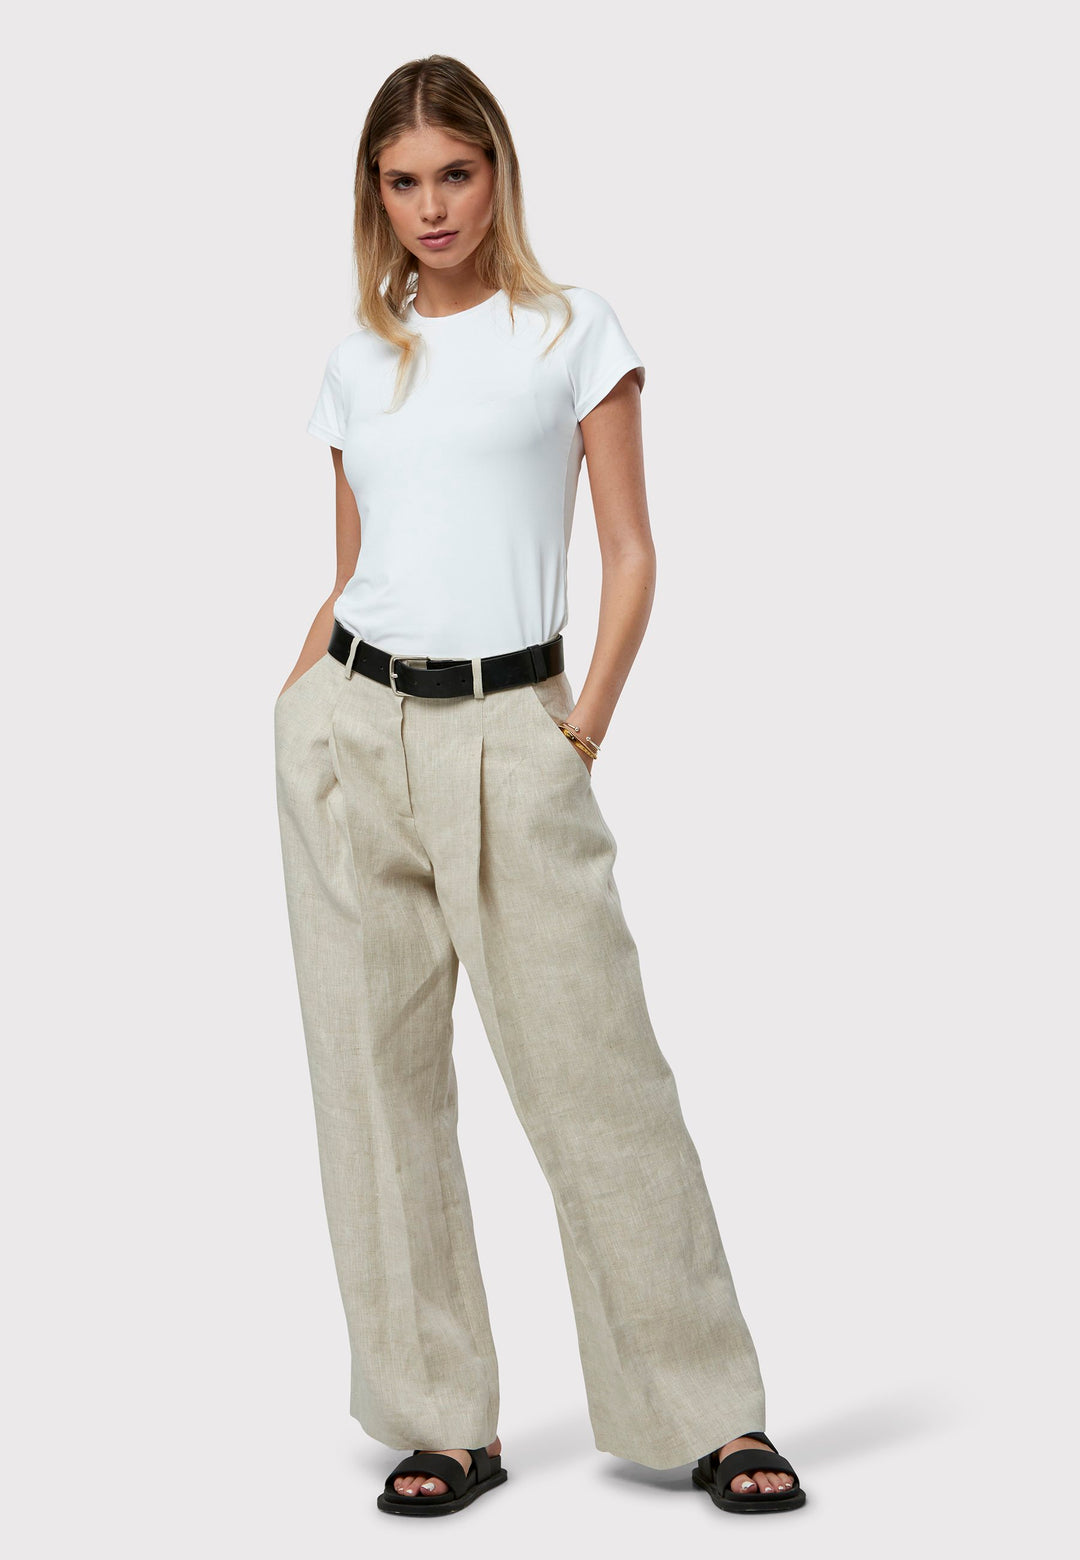 Meet the Lyra Oatmeal Linen Trousers, a stylish and relaxed choice for your wardrobe. With a wide-leg design and pleat front, they blend comfort with sophistication. Made from quality oatmeal linen, these versatile trousers can be dressed up or down for any occasion. Pair with a simple top and casual shoes for a chic, contemporary look that stands out.